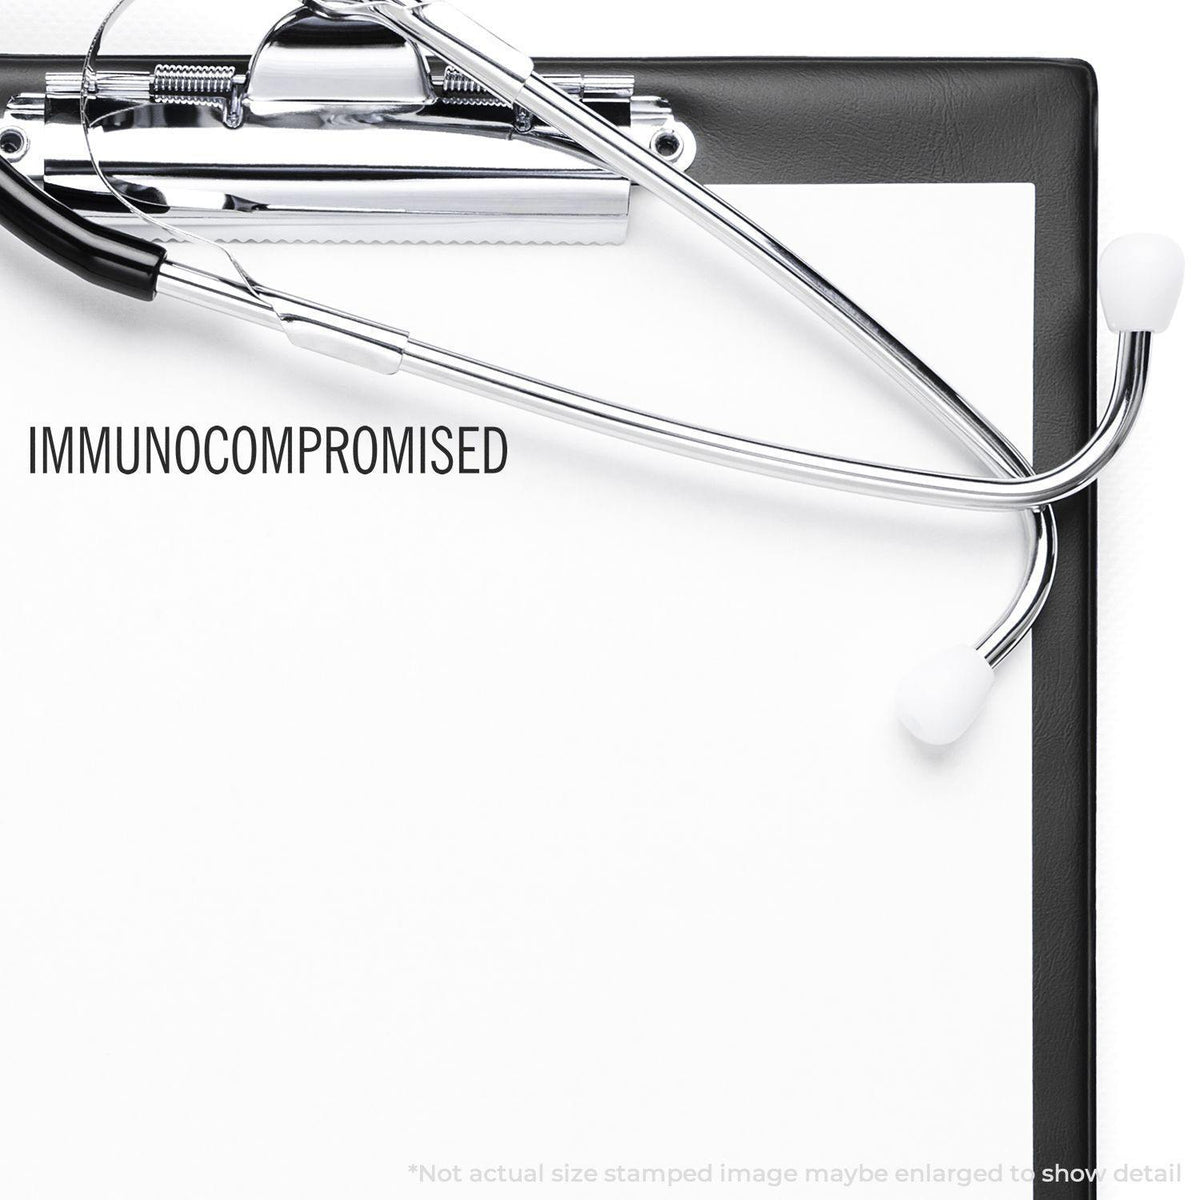 In Use Large Immunocompromised Rubber Stamp Image